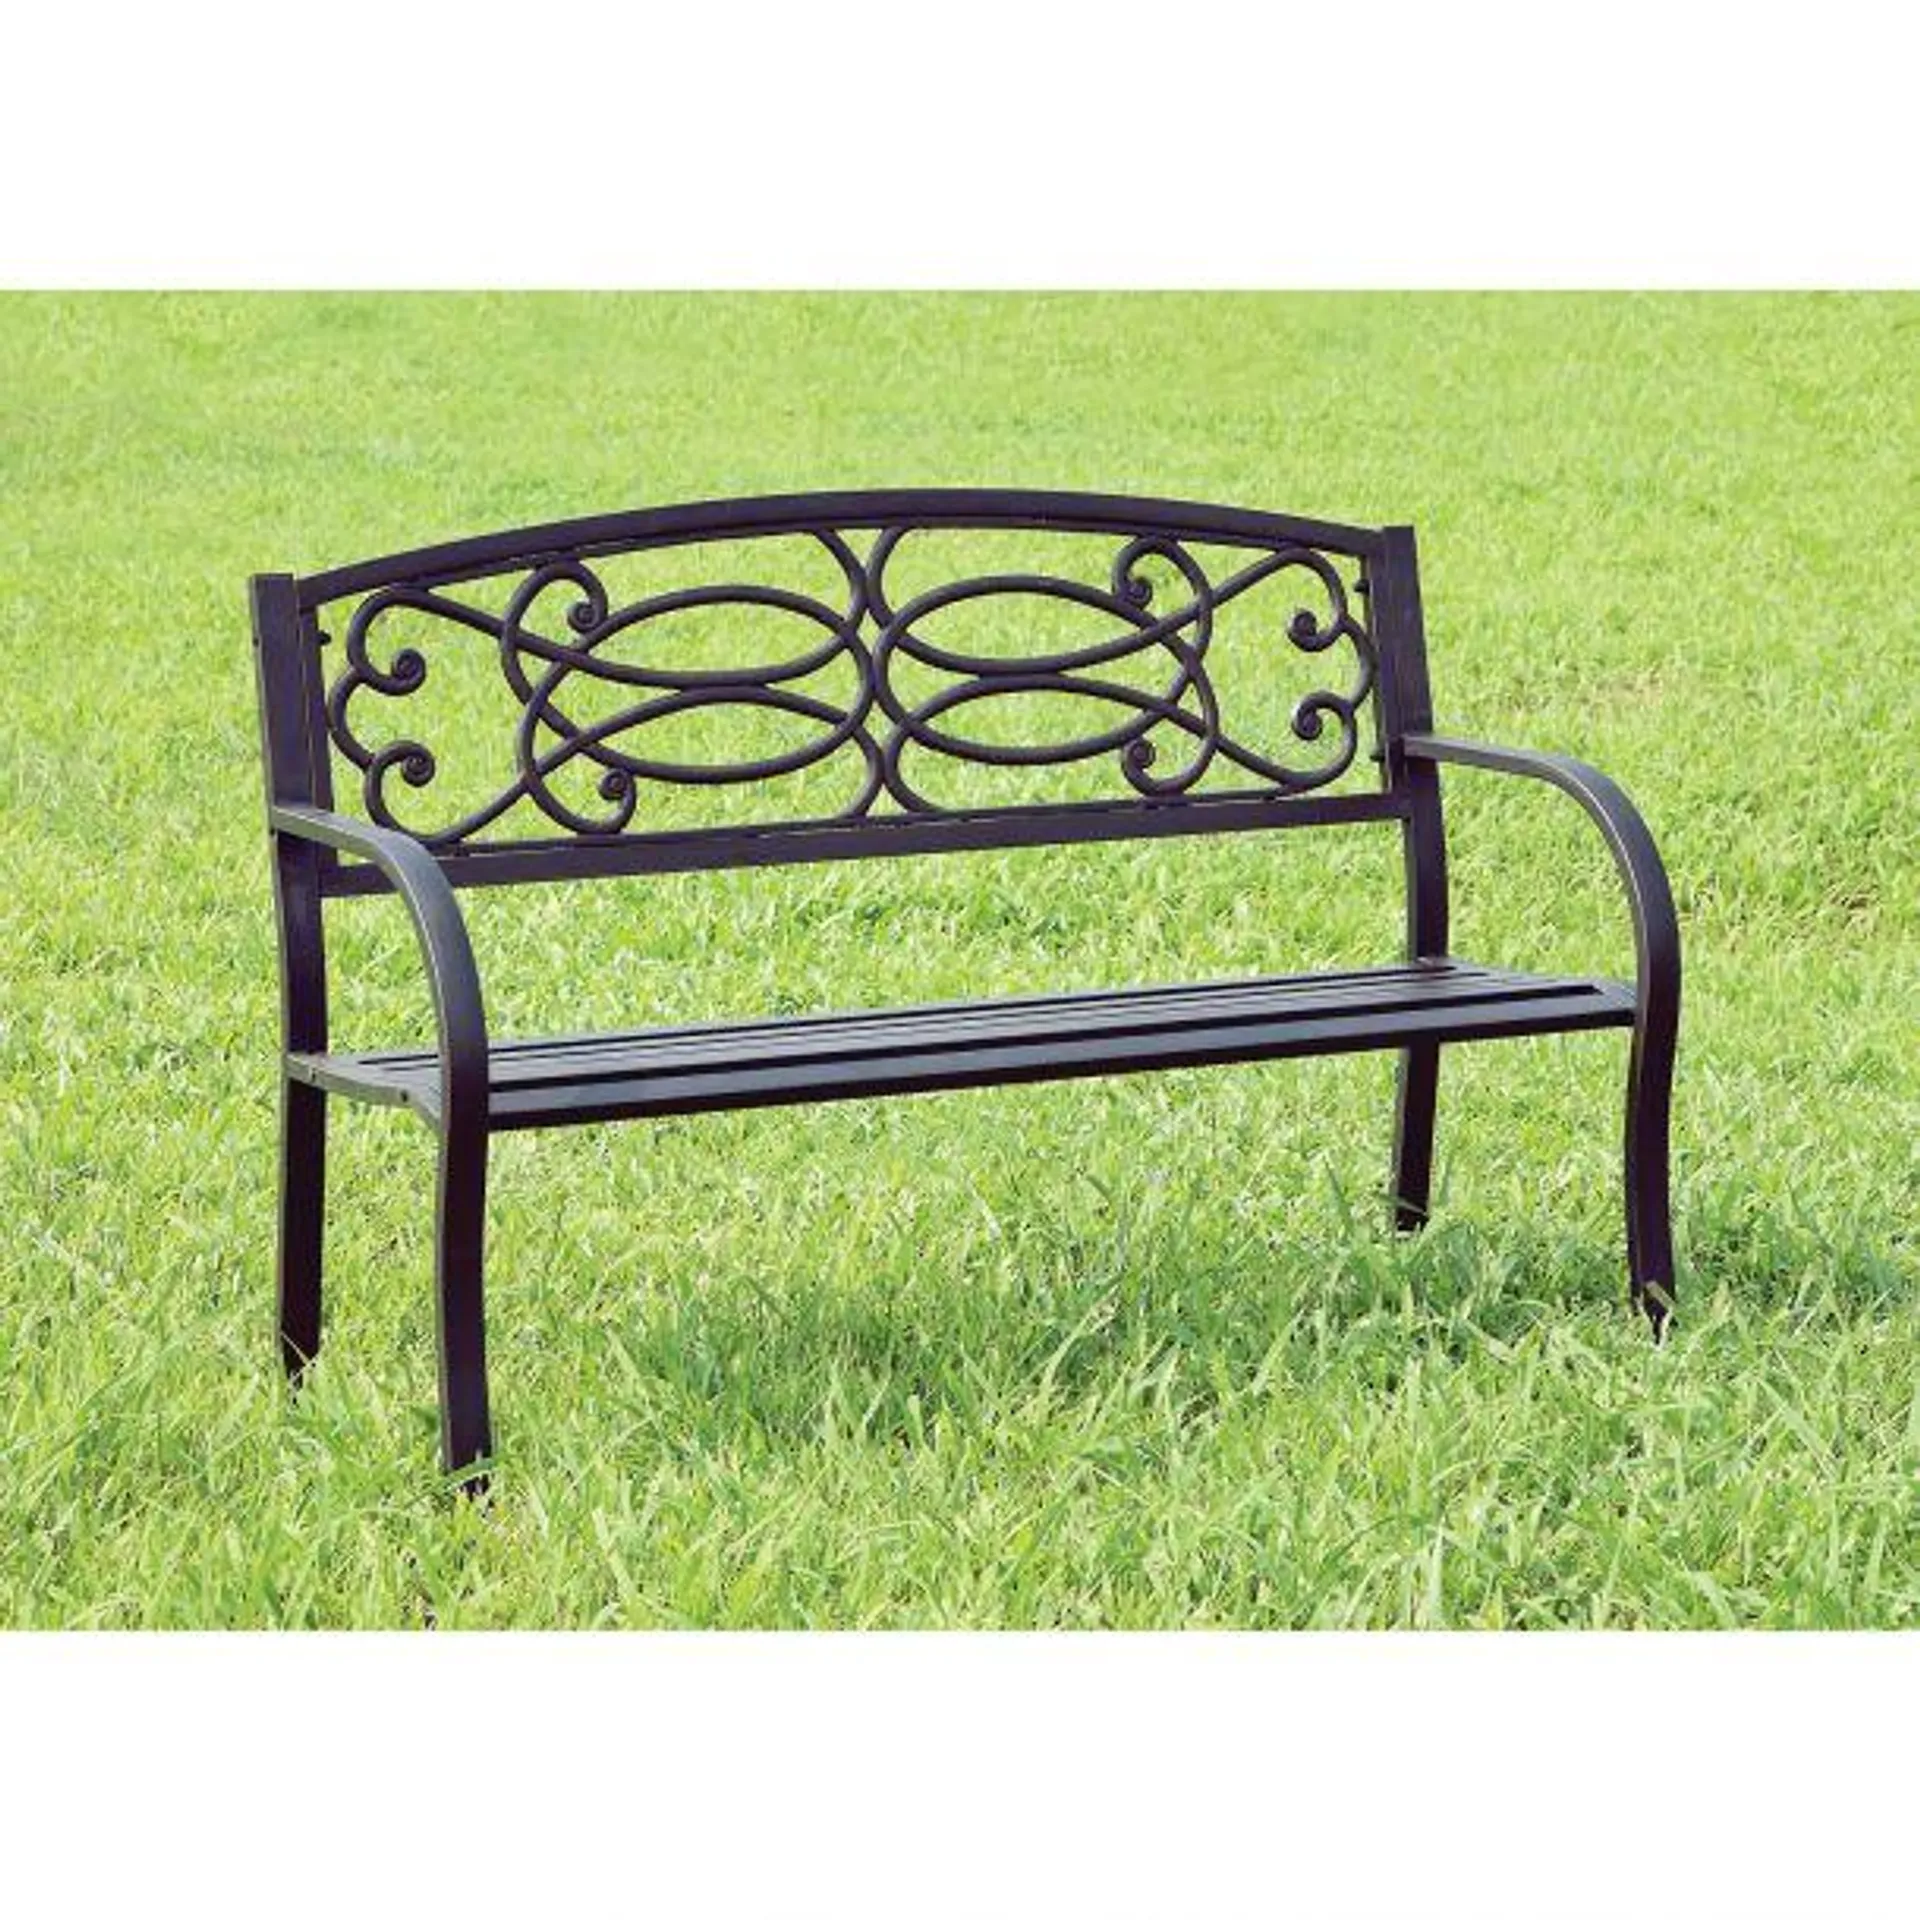 Potter 50" Slated Seat Patio Bench with Armrest by Furniture of America - Black